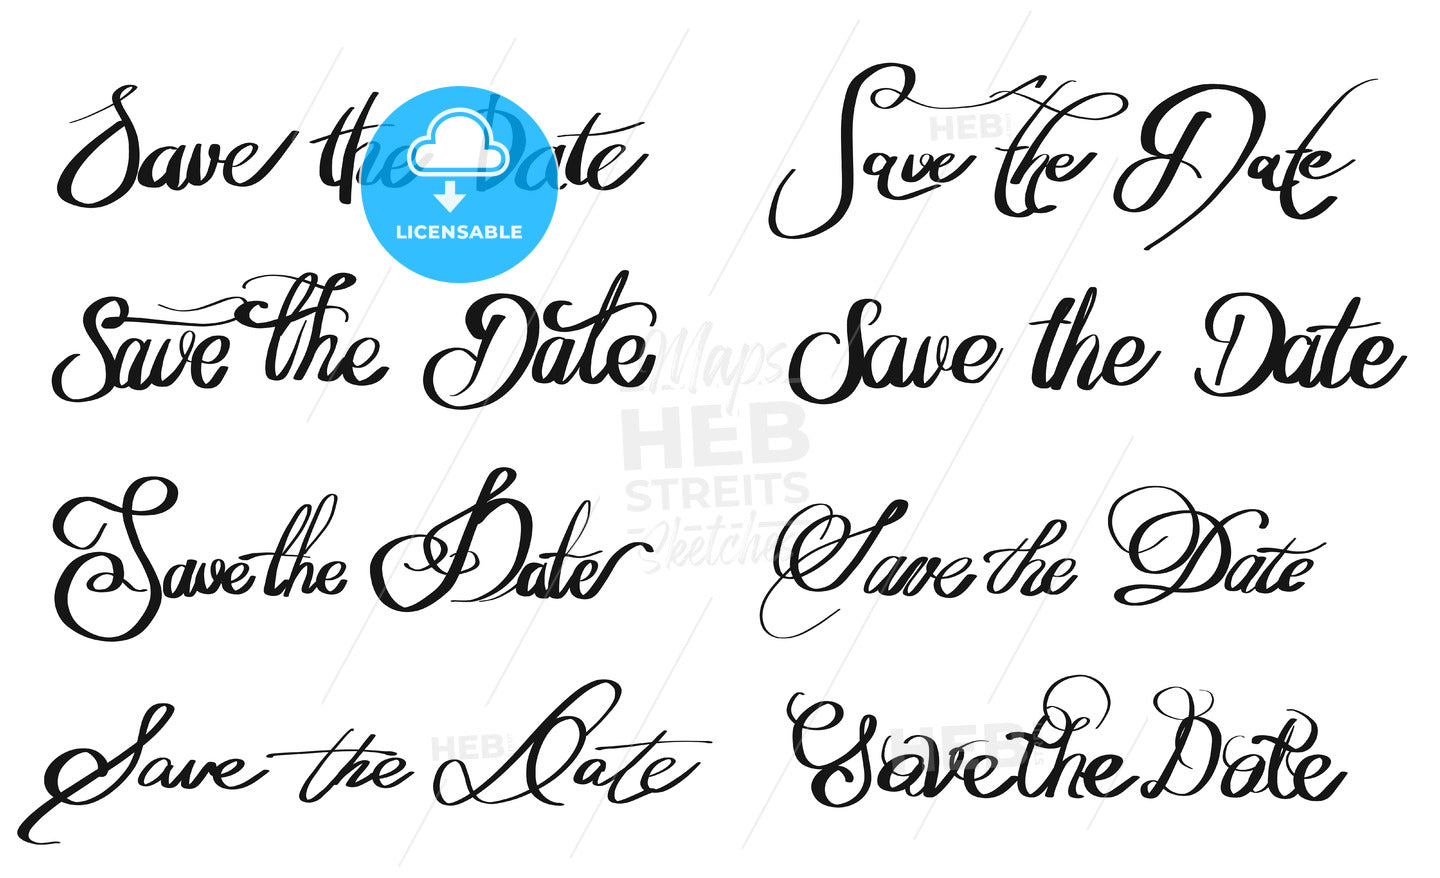 Save the Date various written Quotes – instant download